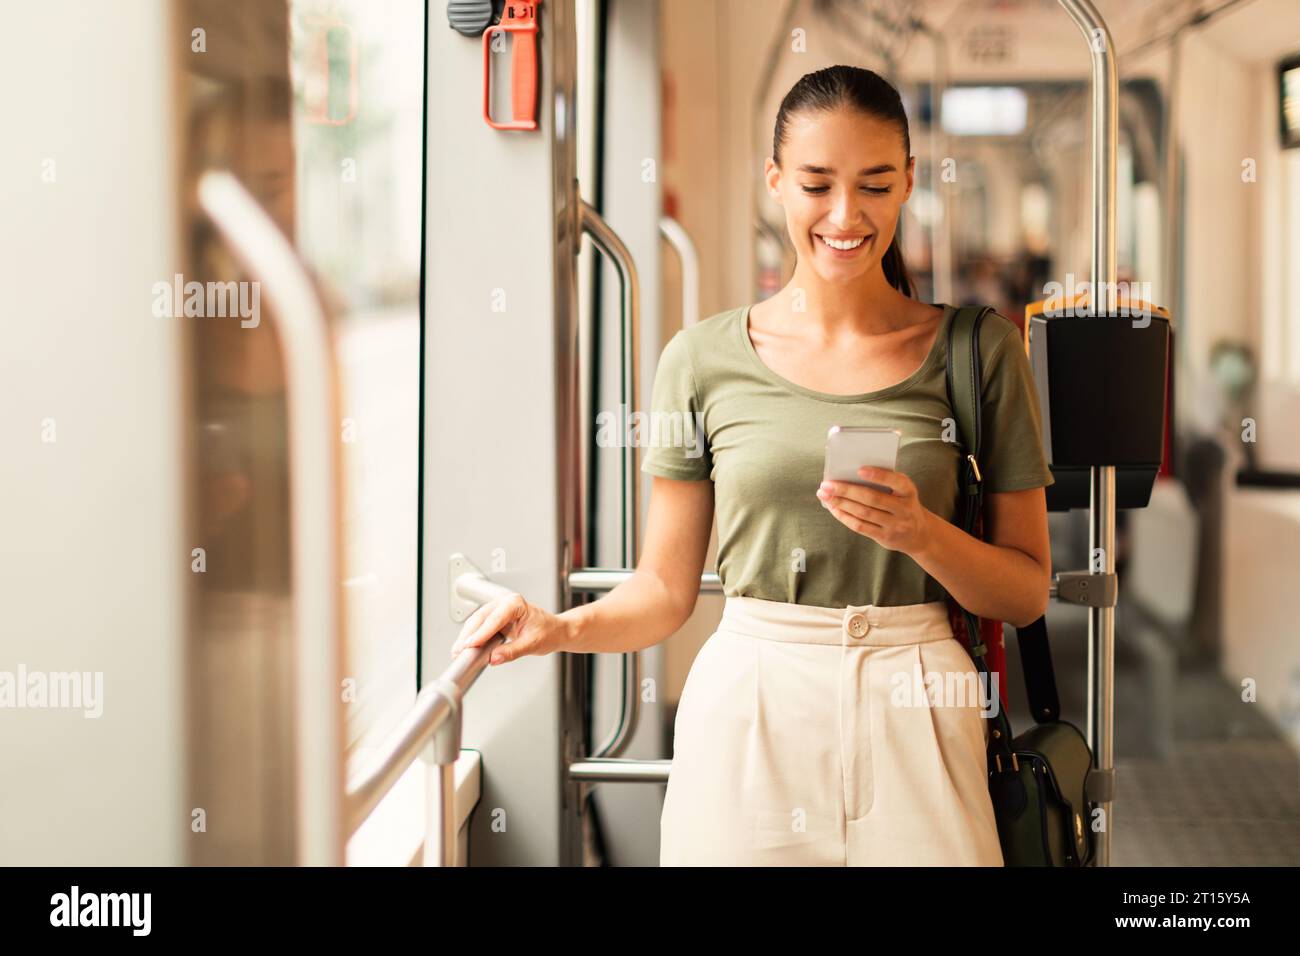 Smiling woman passenger using mobile phone on a tram indoor Stock Photo